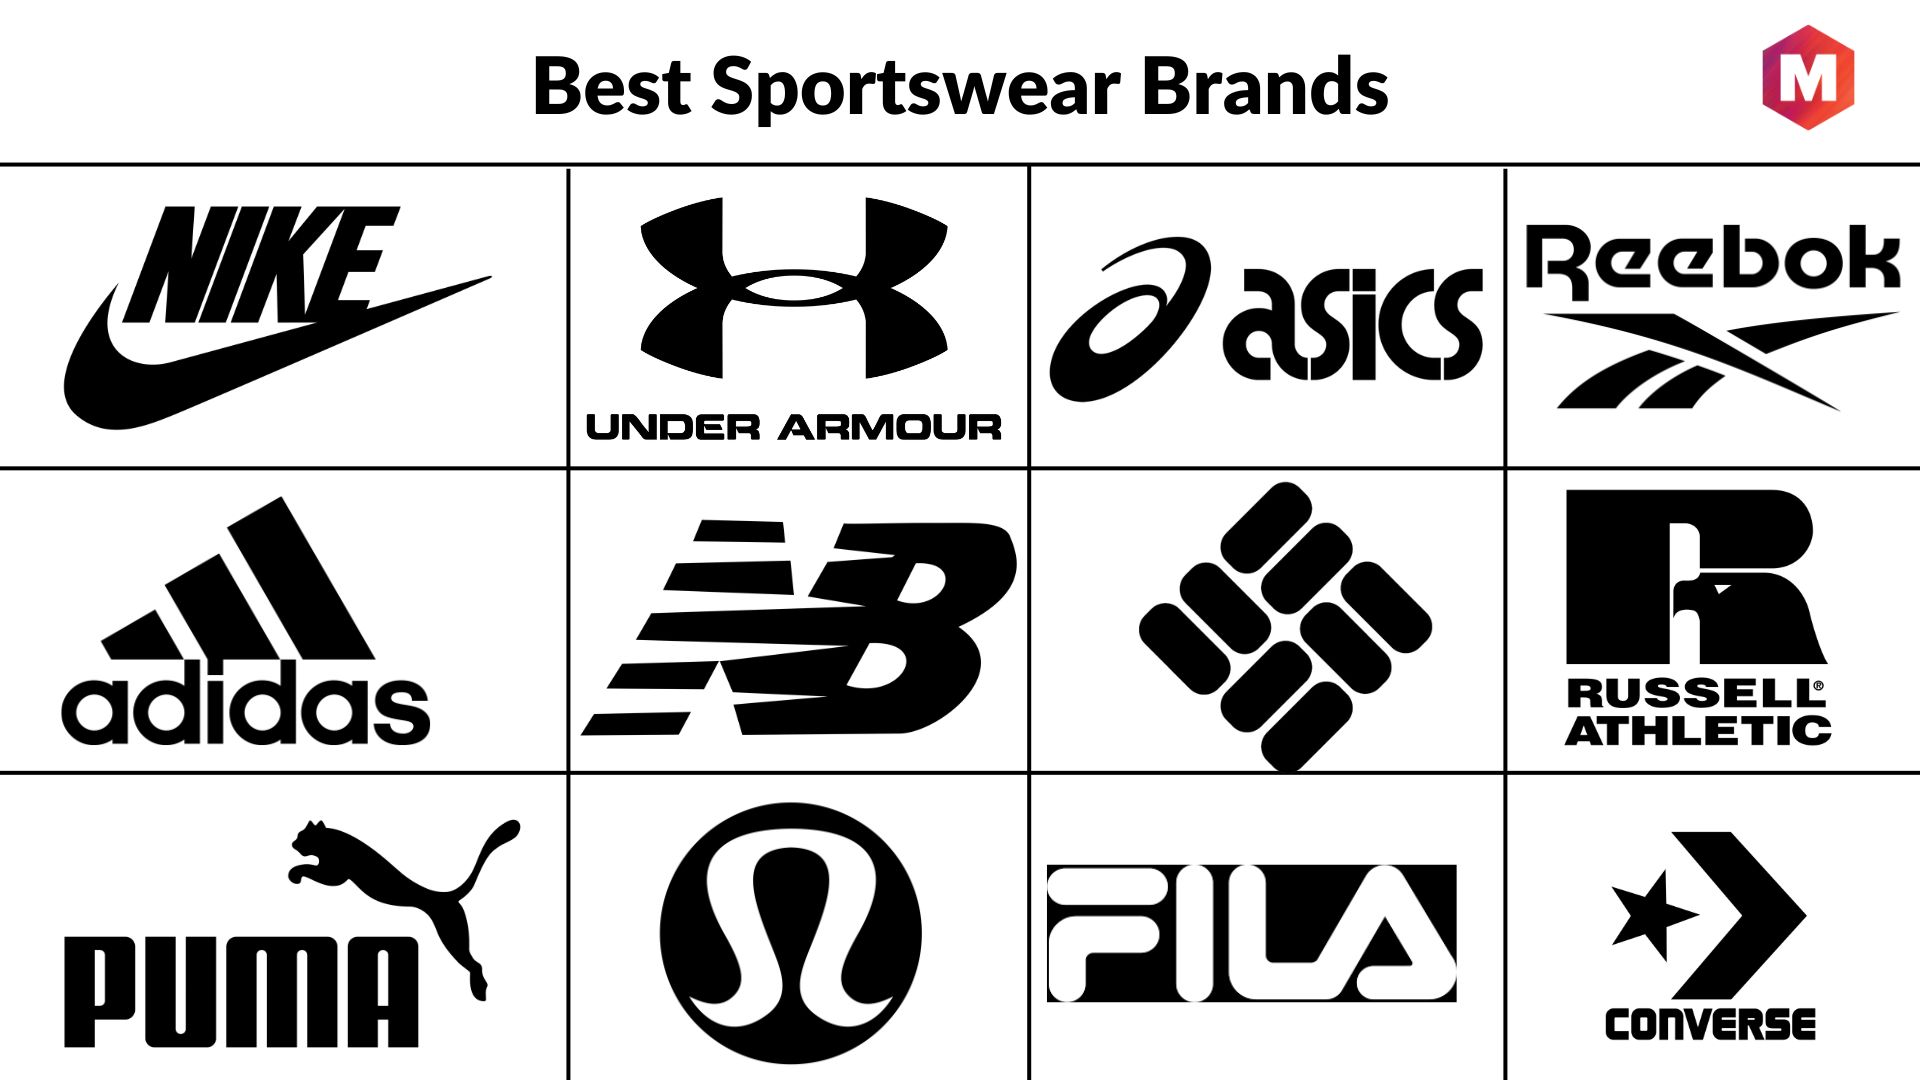 Brands: luxury, sport and fashion holding strong on the global ranking list